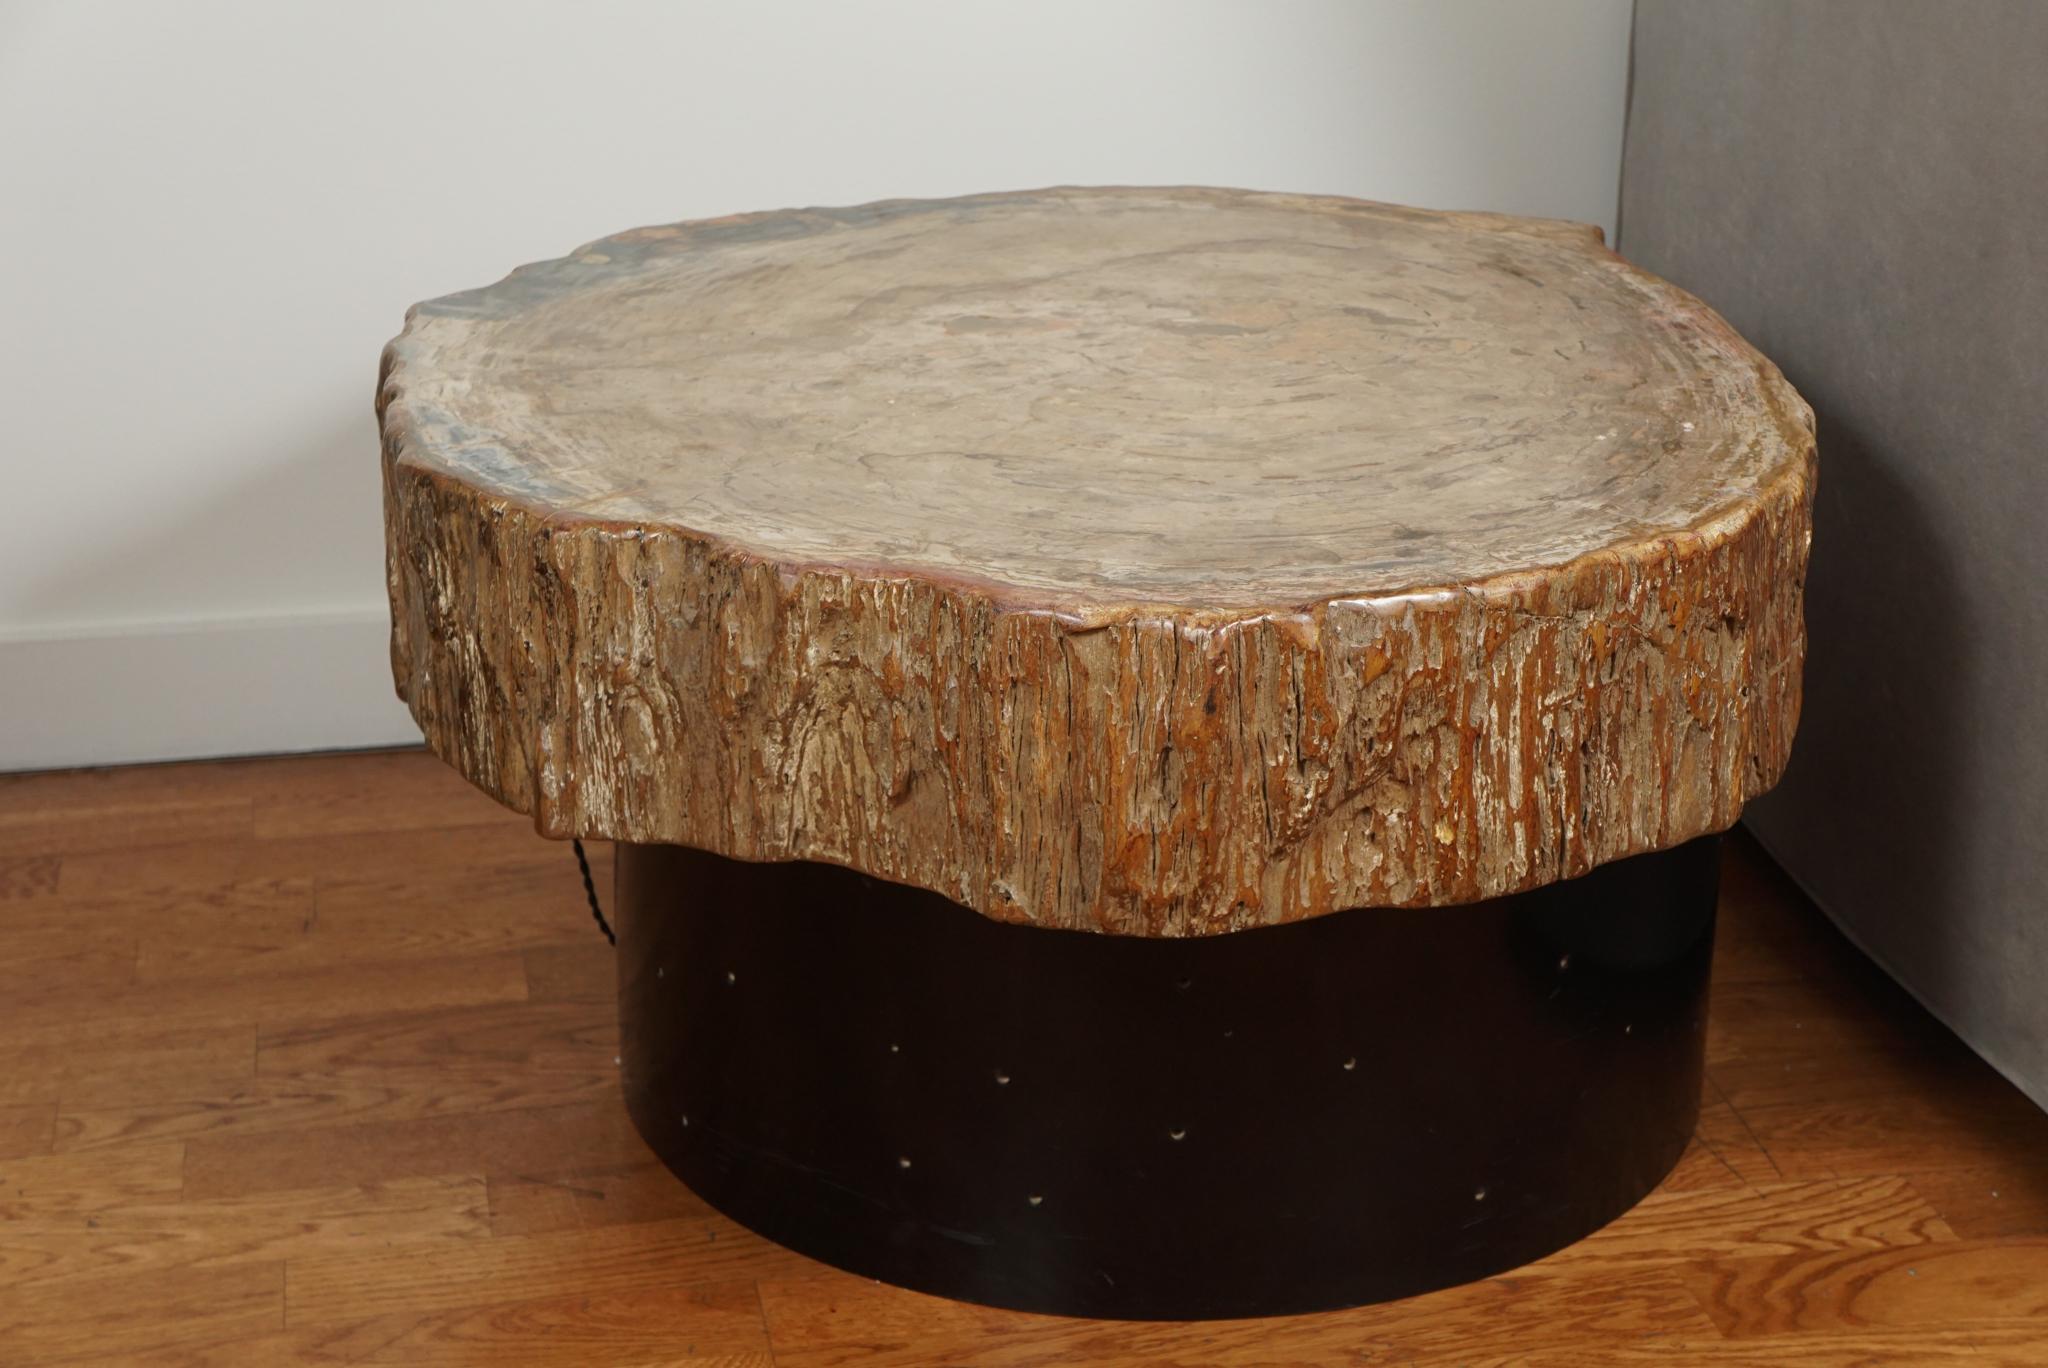 A modernist cocktail table featuring a round base in black lacquered wood with multiple perforations as an interior light source.
on the base sits a top composed of a thick petrified wood slab with a natural edge.